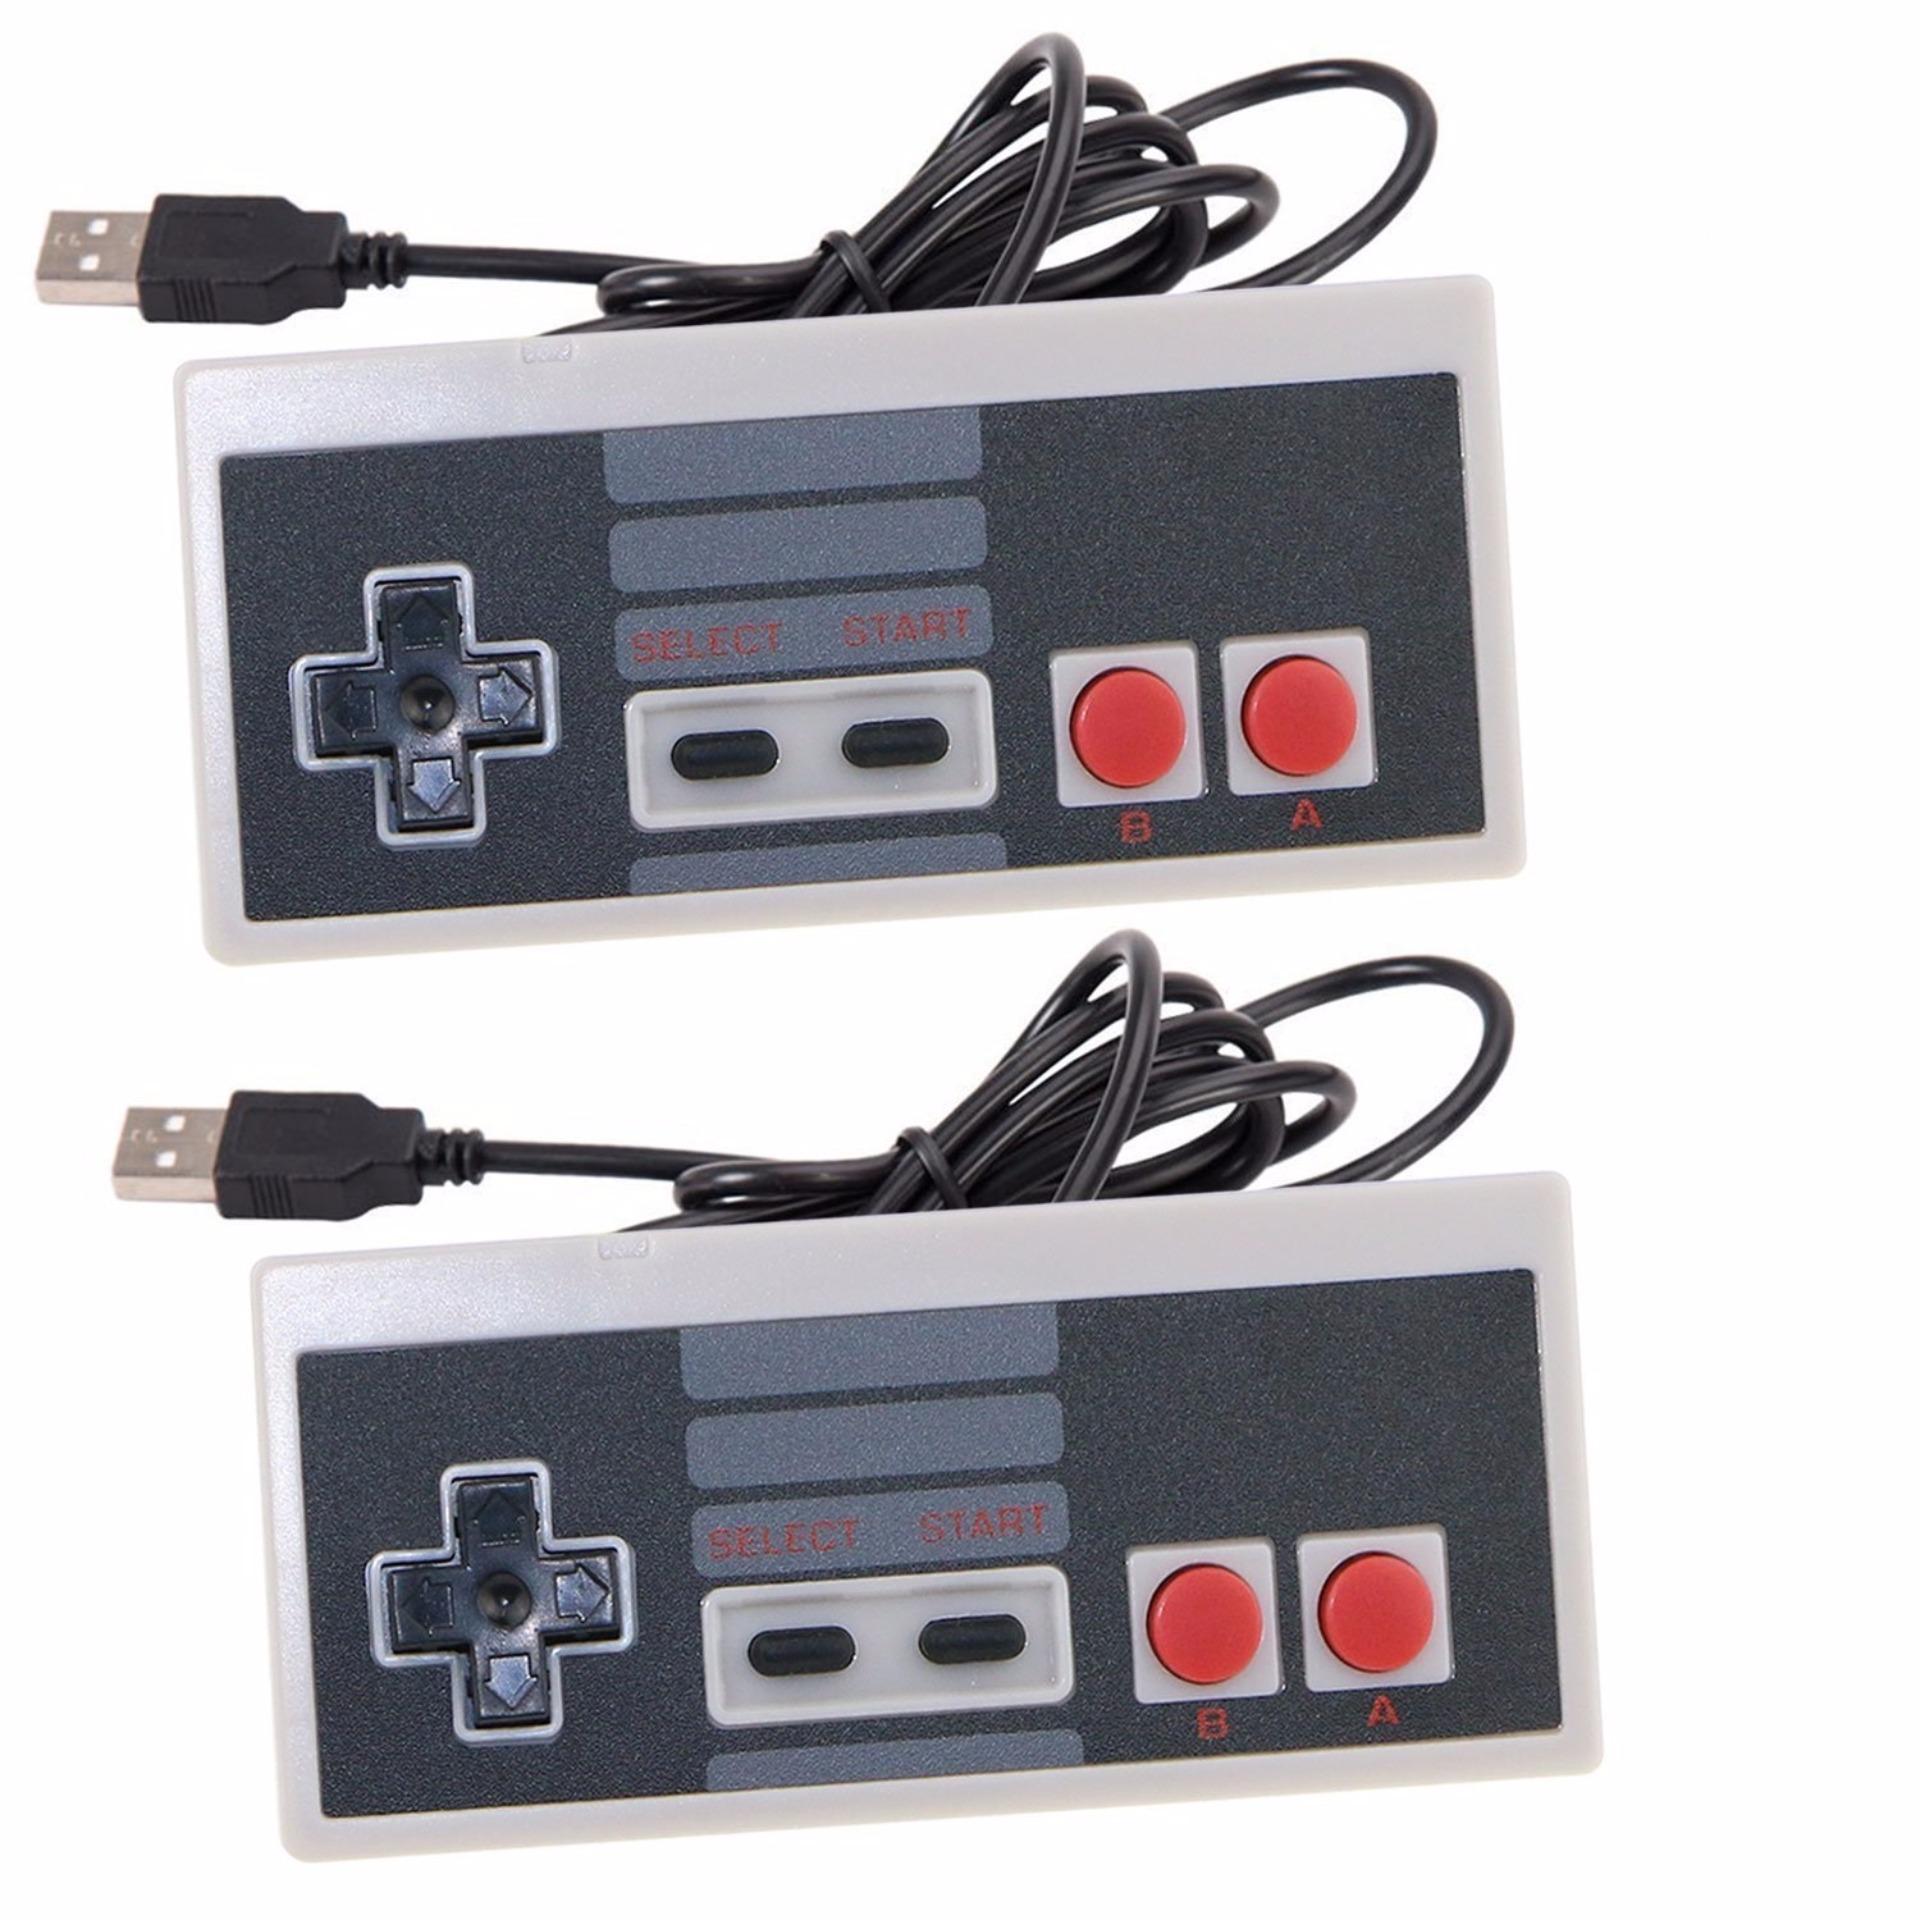 2x classic wired usb game controller gamepad for nintendo nes pc windows & mac free